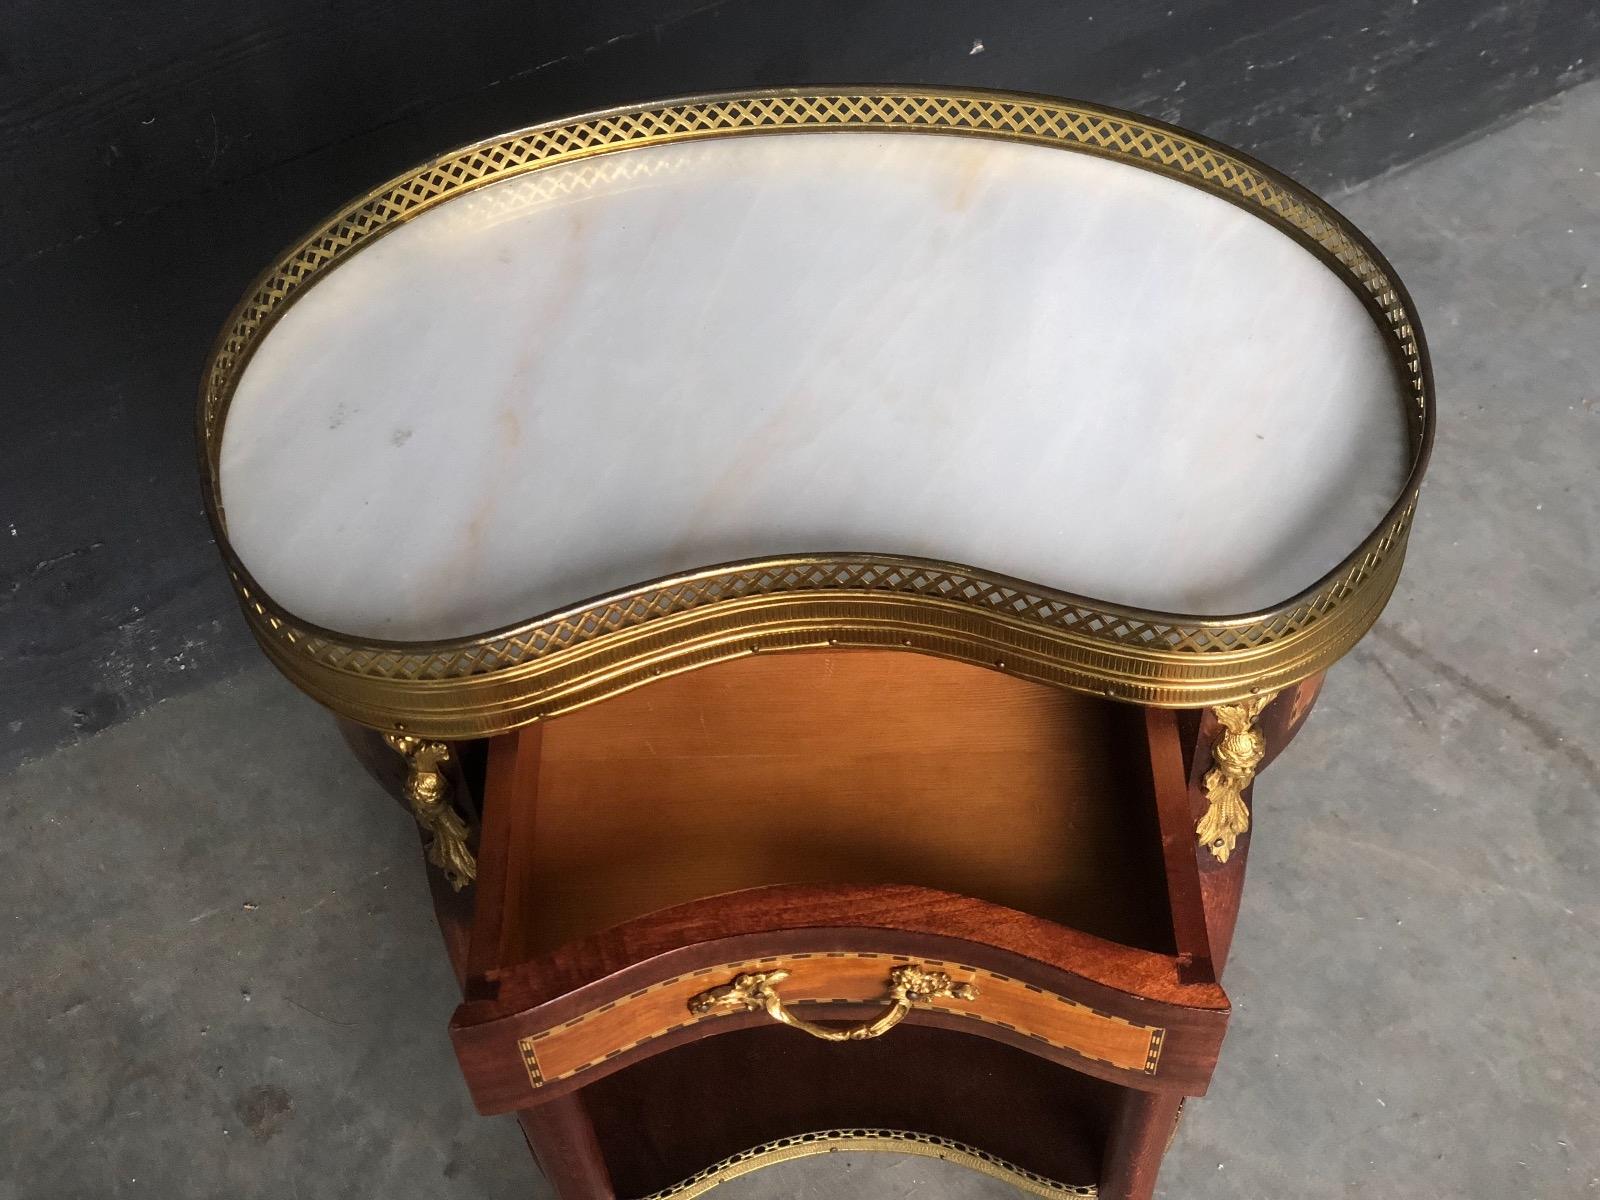 Kidney marble top side table 